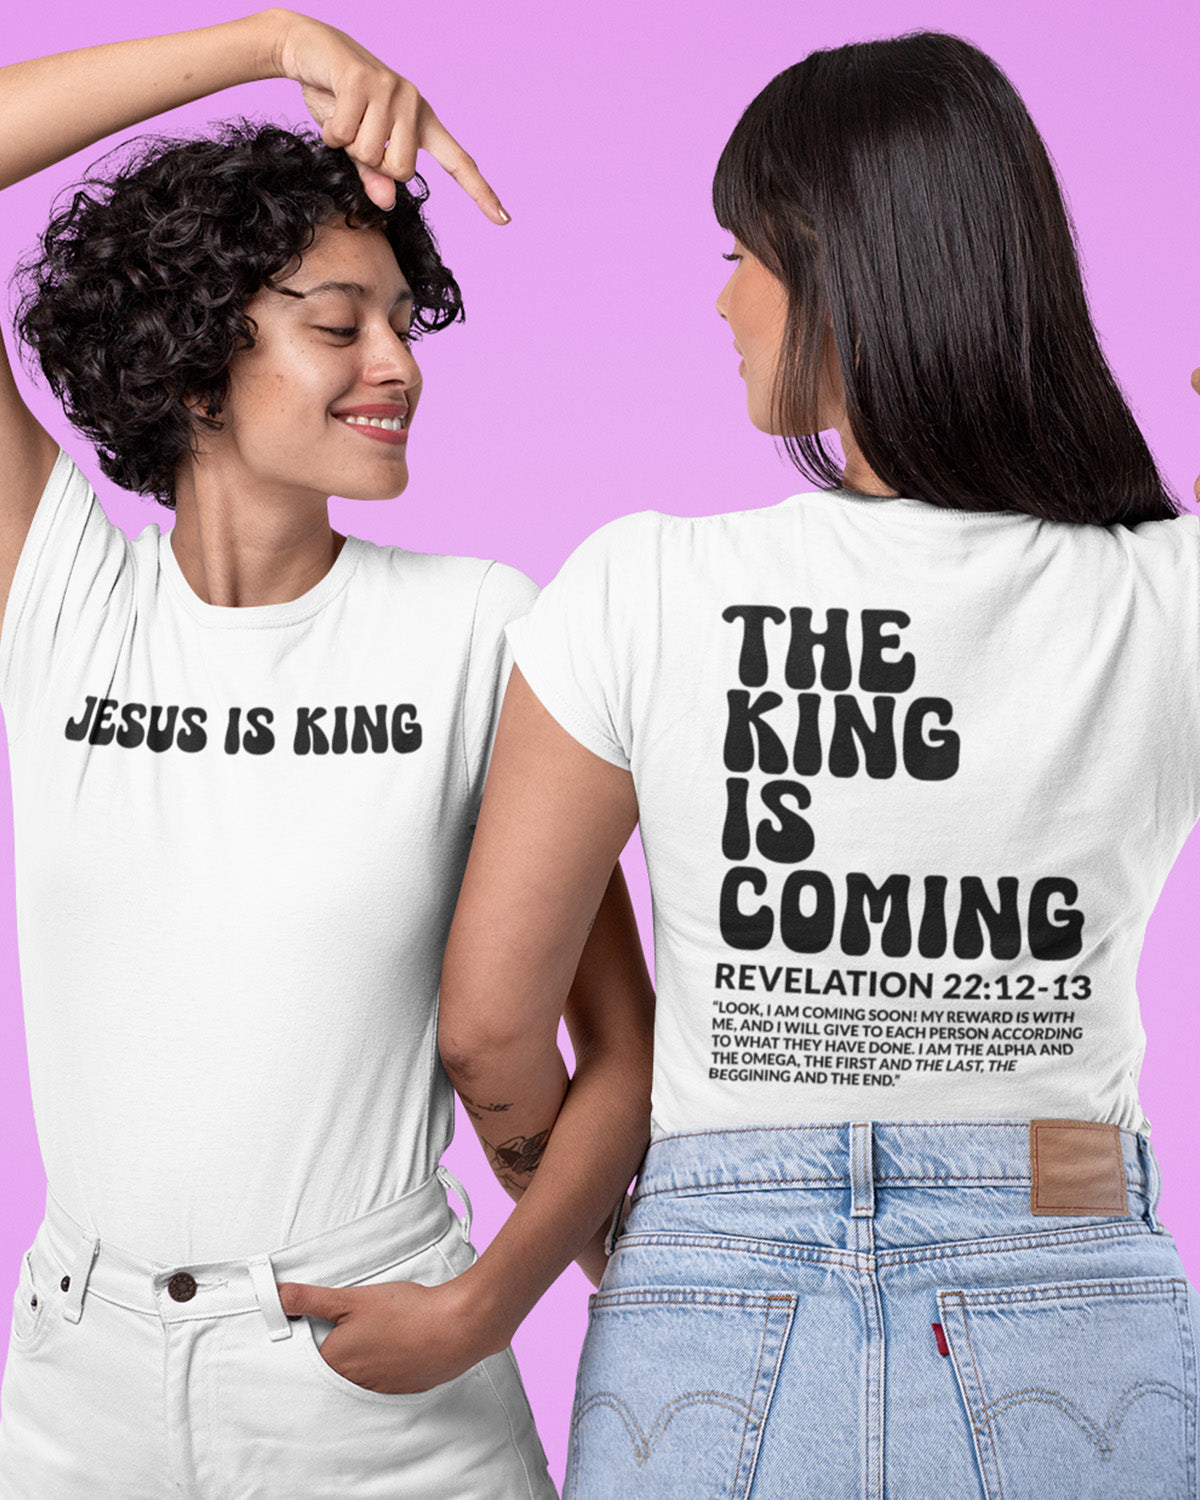 The King is Coming Revelation Jesus Bible Verse Front back T Shirt